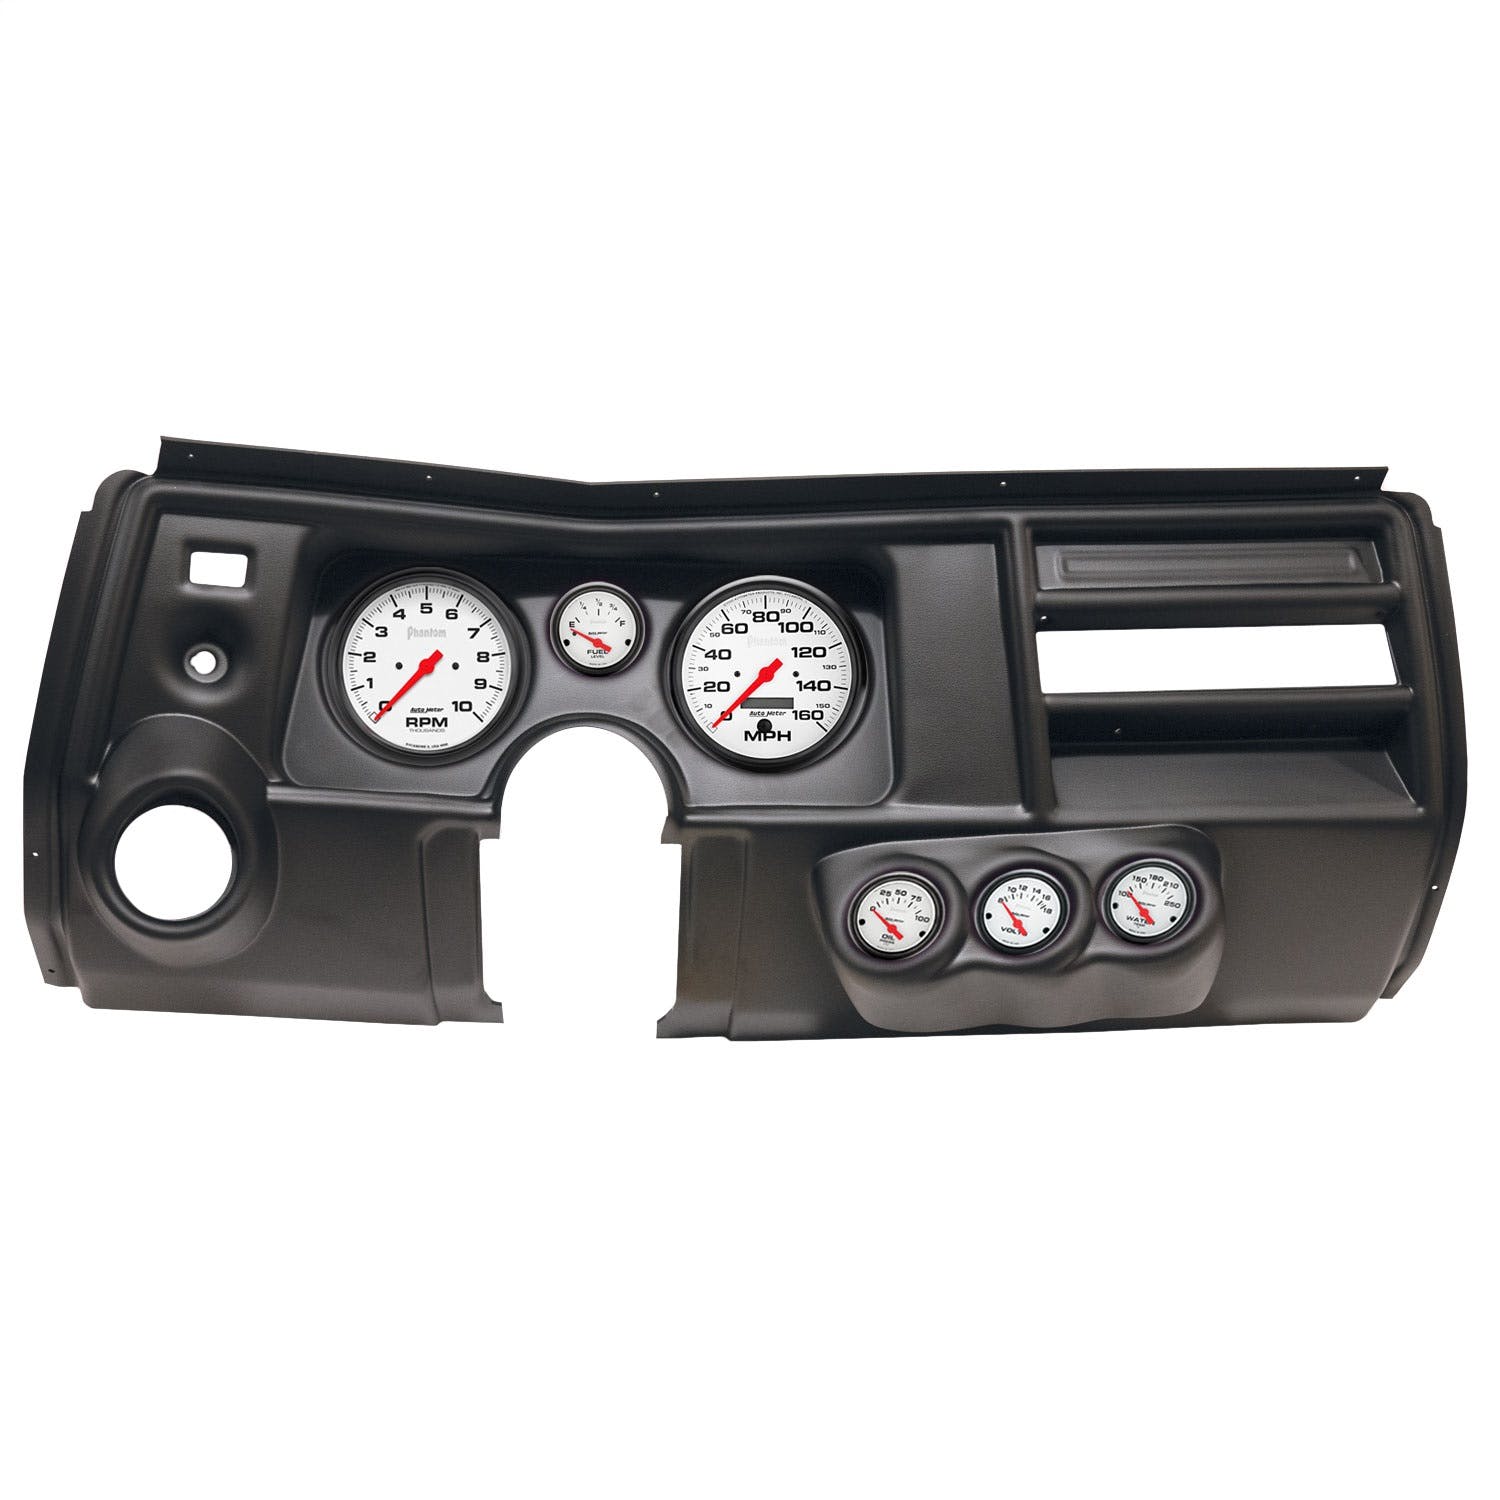 AutoMeter Products 2911-09 6 Gauge Direct-Fit Dash Kit, Chevy Chevelle Vent 69, Phantom